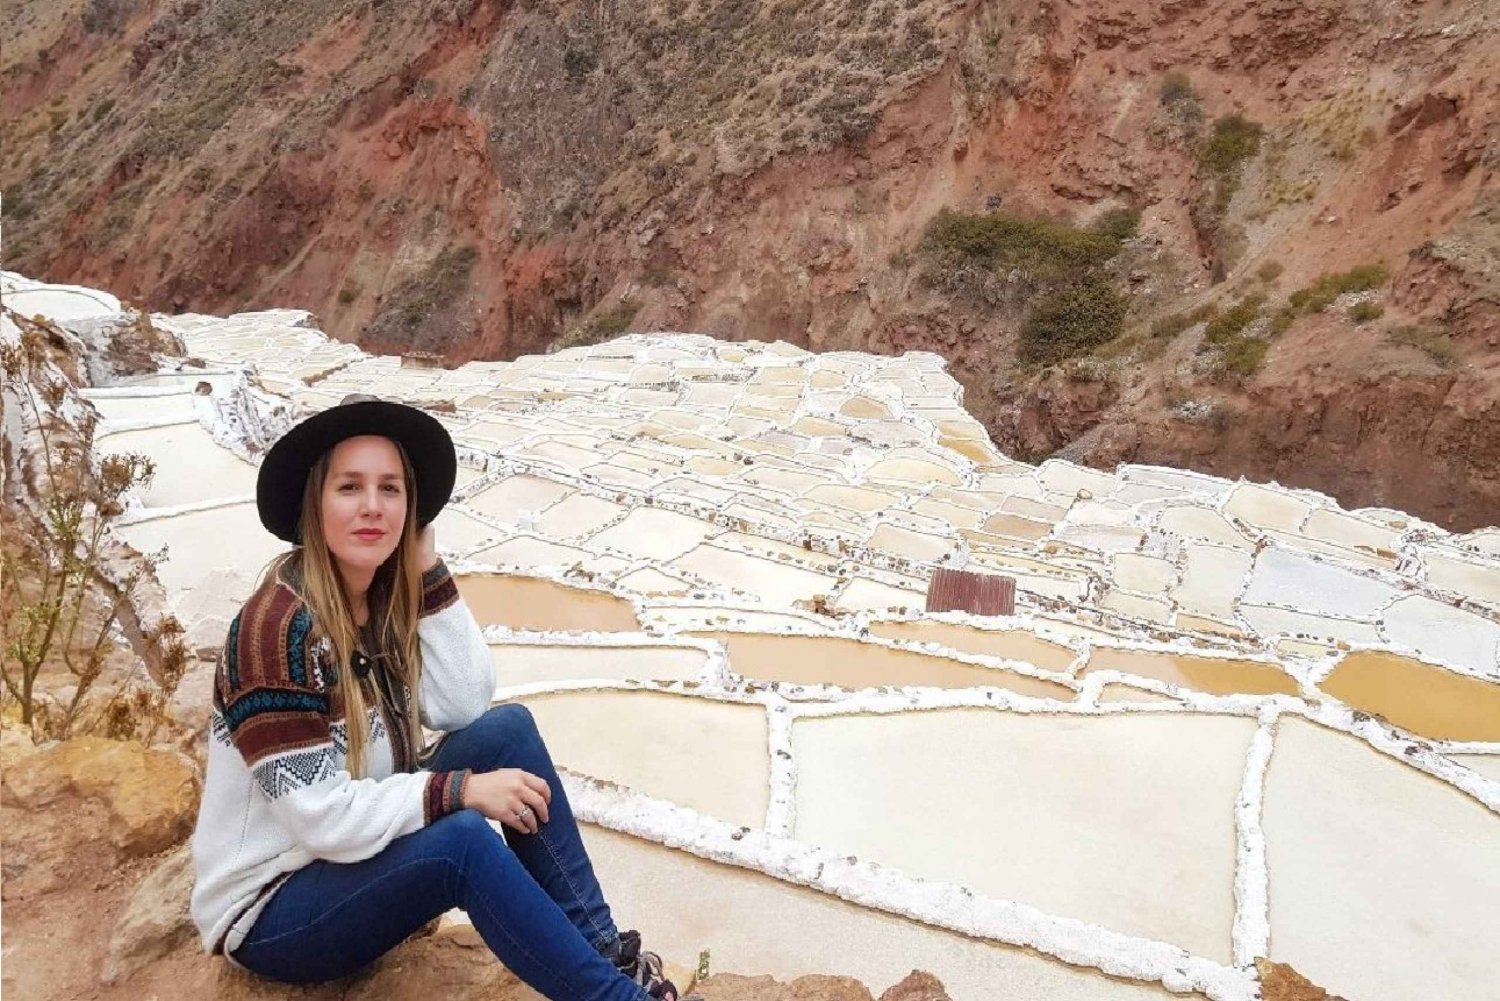 From Cuzco: Sacred Valley, Moray Terraces, and Salt Mines